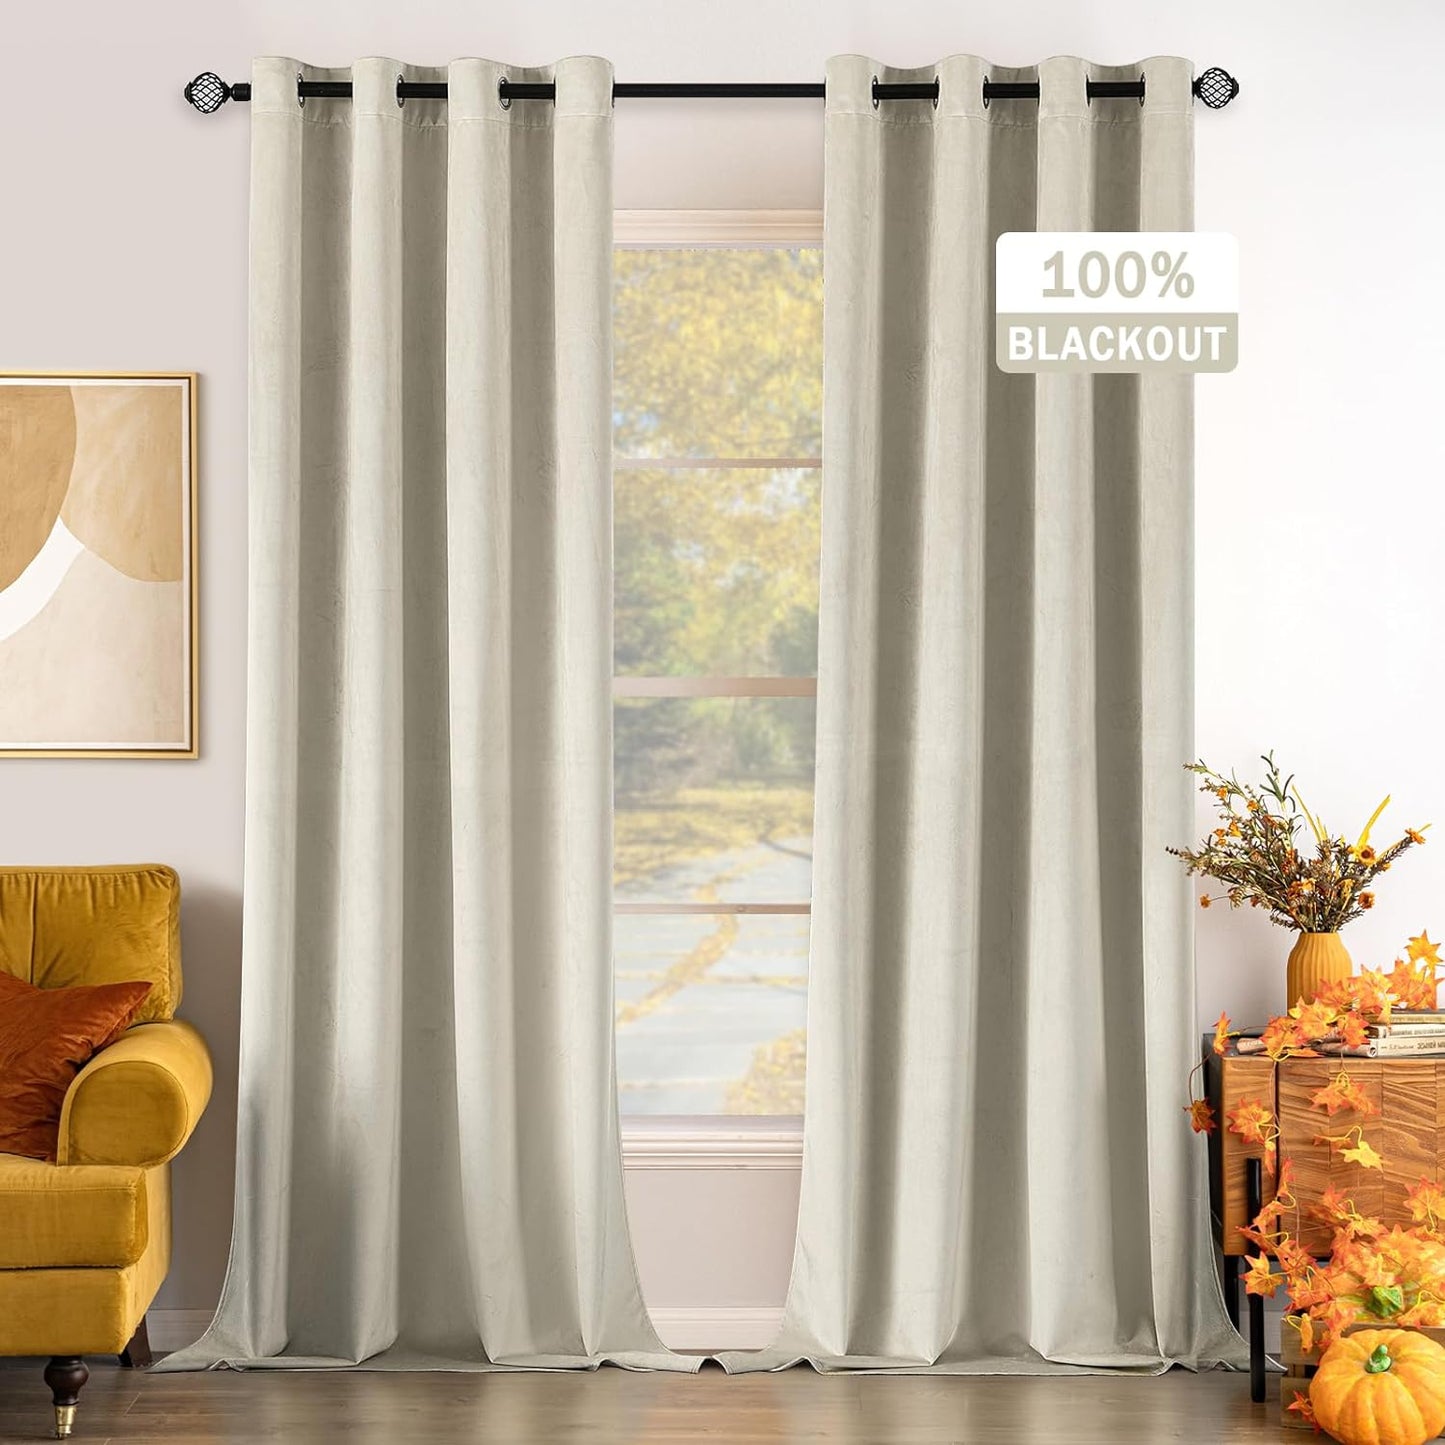 EMEMA Olive Green Velvet Curtains 84 Inch Length 2 Panels Set, Room Darkening Luxury Curtains, Grommet Thermal Insulated Drapes, Window Curtains for Living Room, W52 X L84, Olive Green  EMEMA 100 Blackout/ Ivory White W52" X L96" 